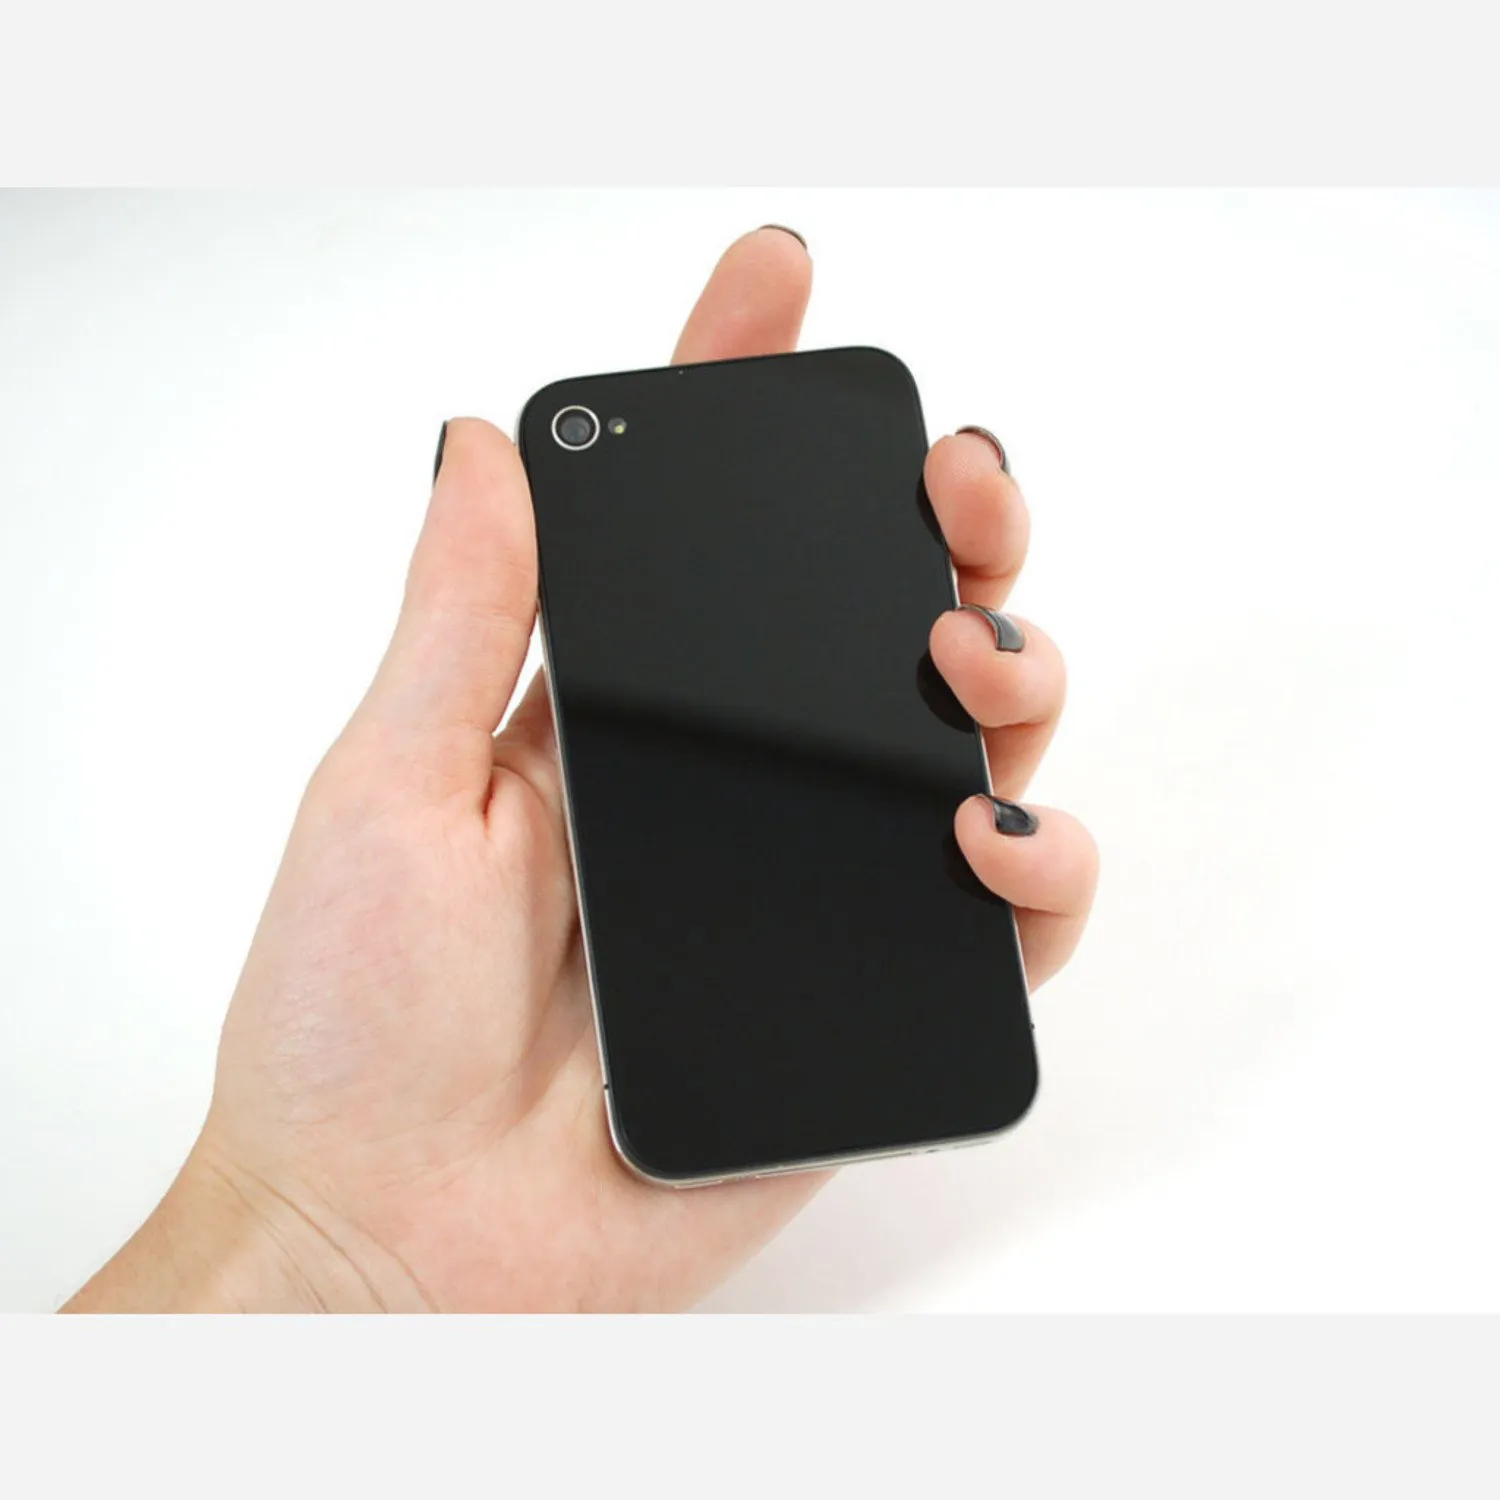 Photo of Black No-Logo iPhone Replacement Back - iPhone 4S